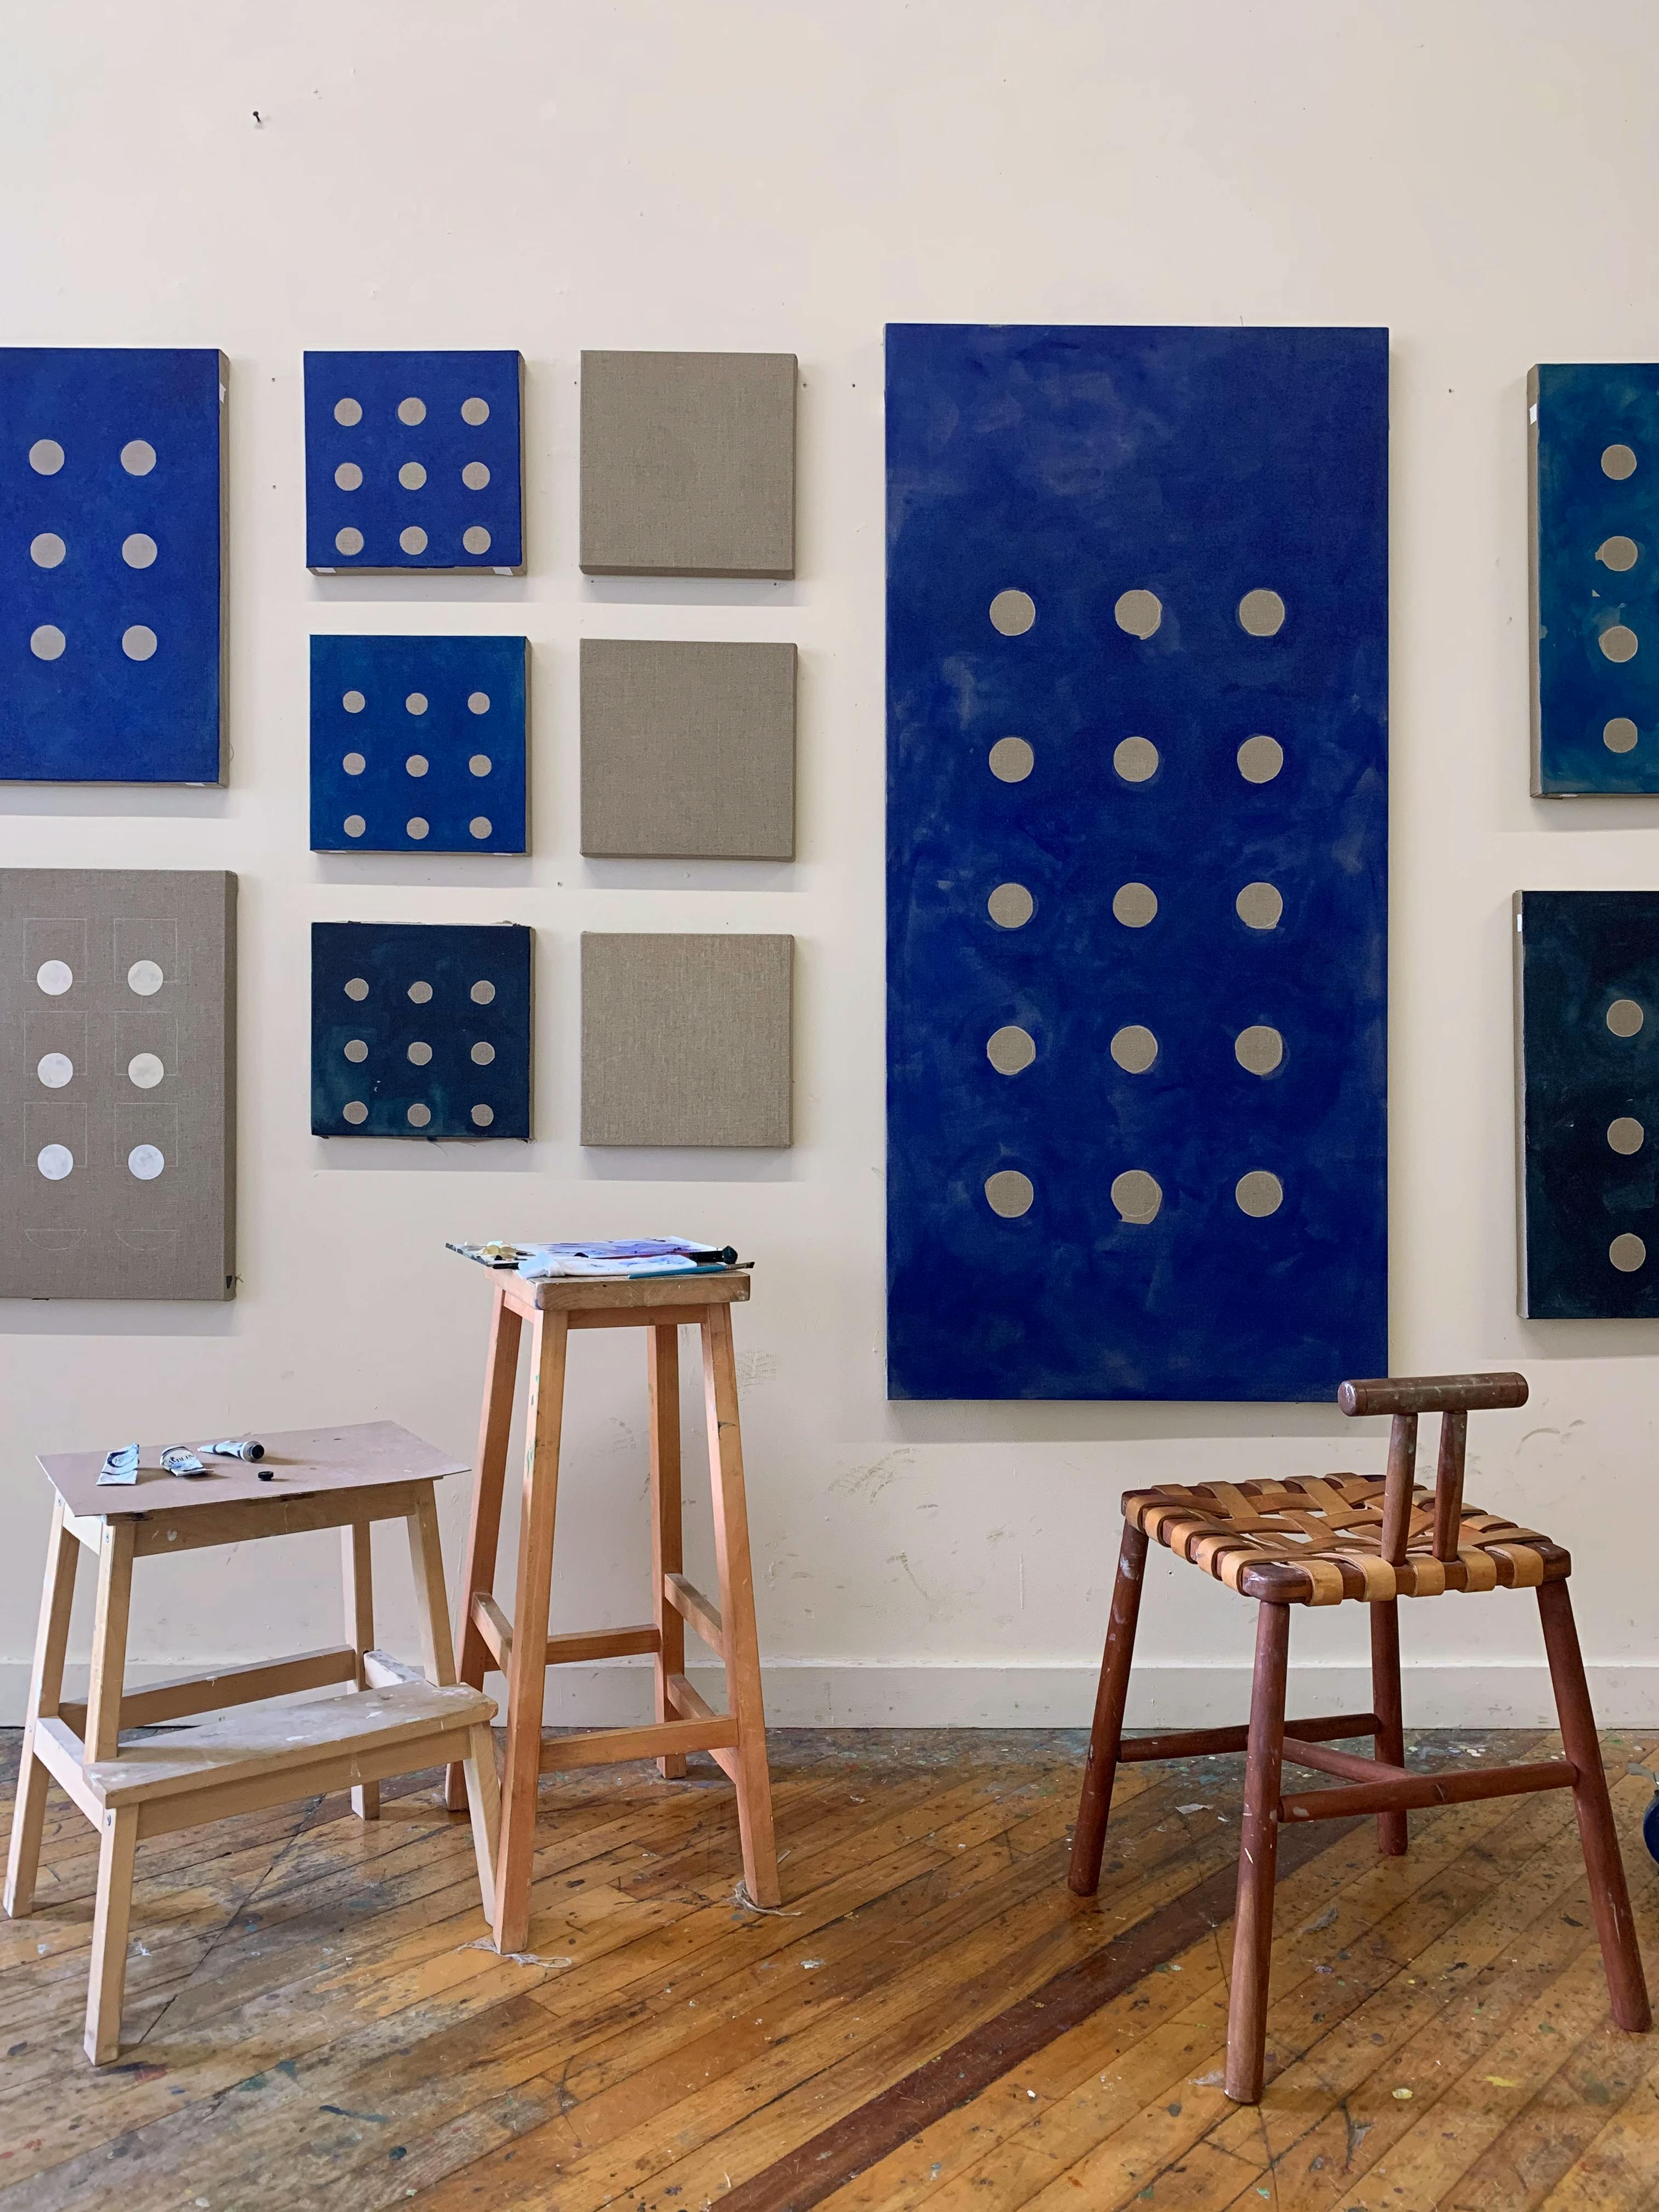 Minimalist, blue and grey oil paintings of different sizes installed on a white wall in artist Carla Weeks' studio.